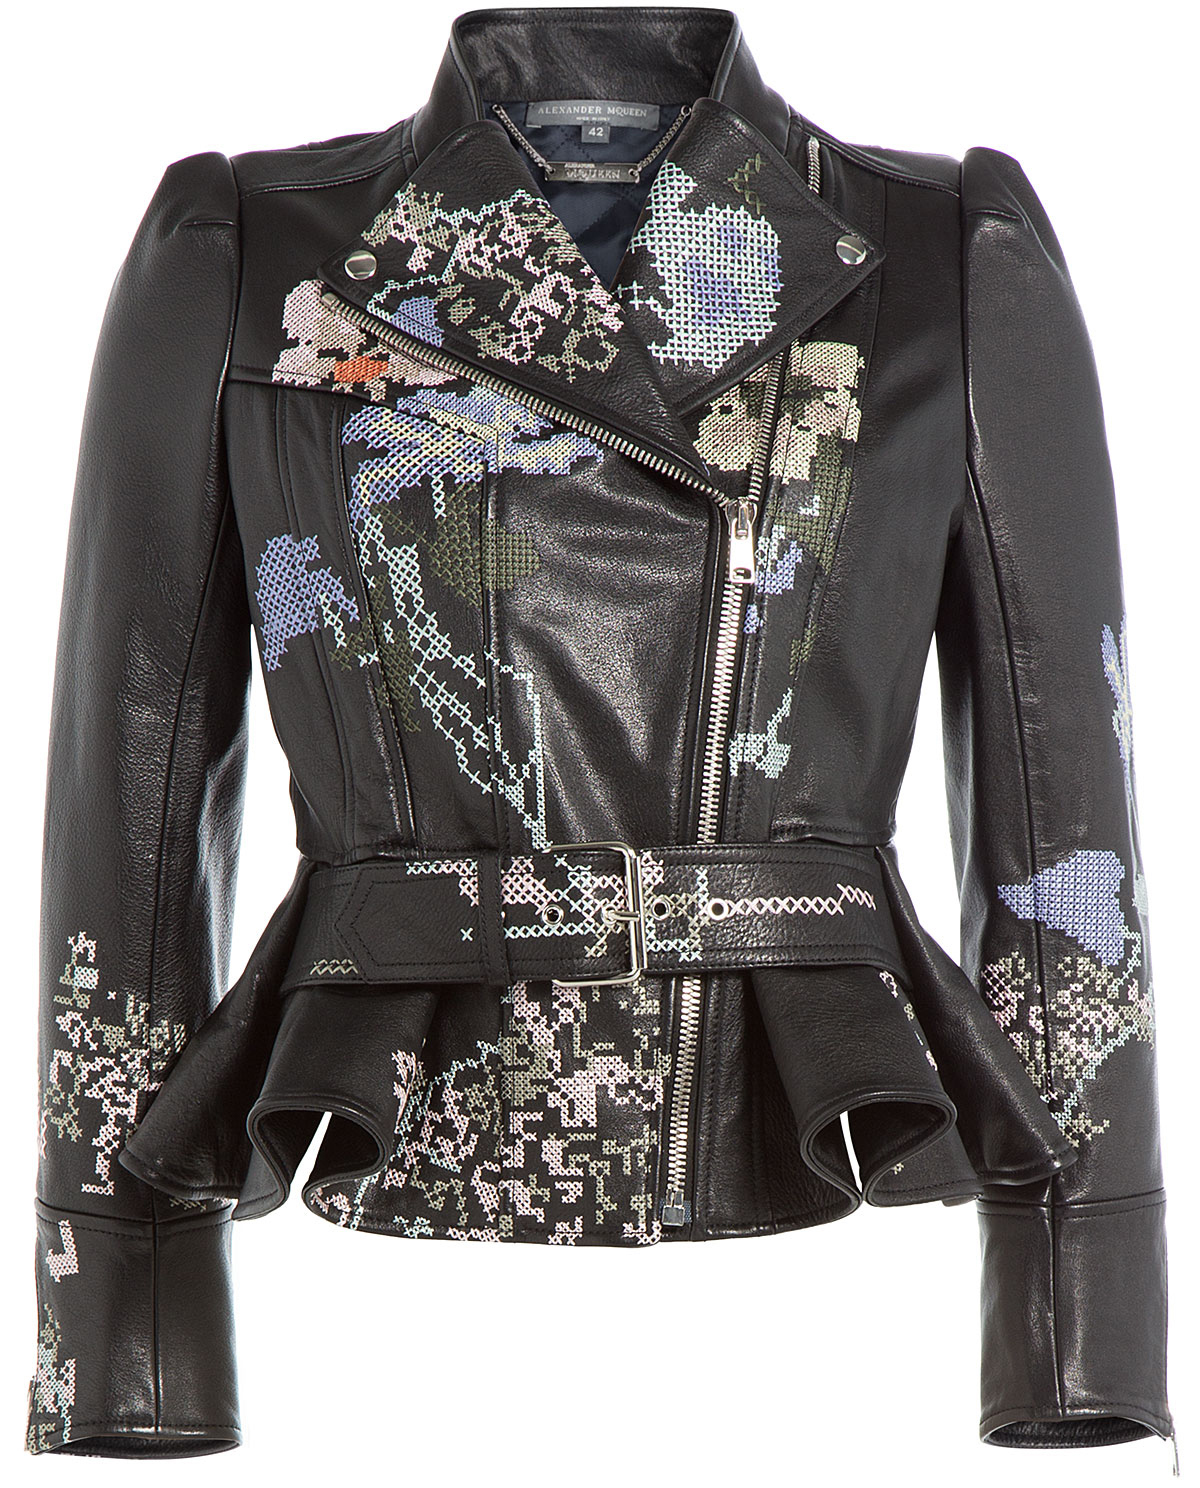 Alexander McQueen Leather Jacket Cross Stitch Embroidery